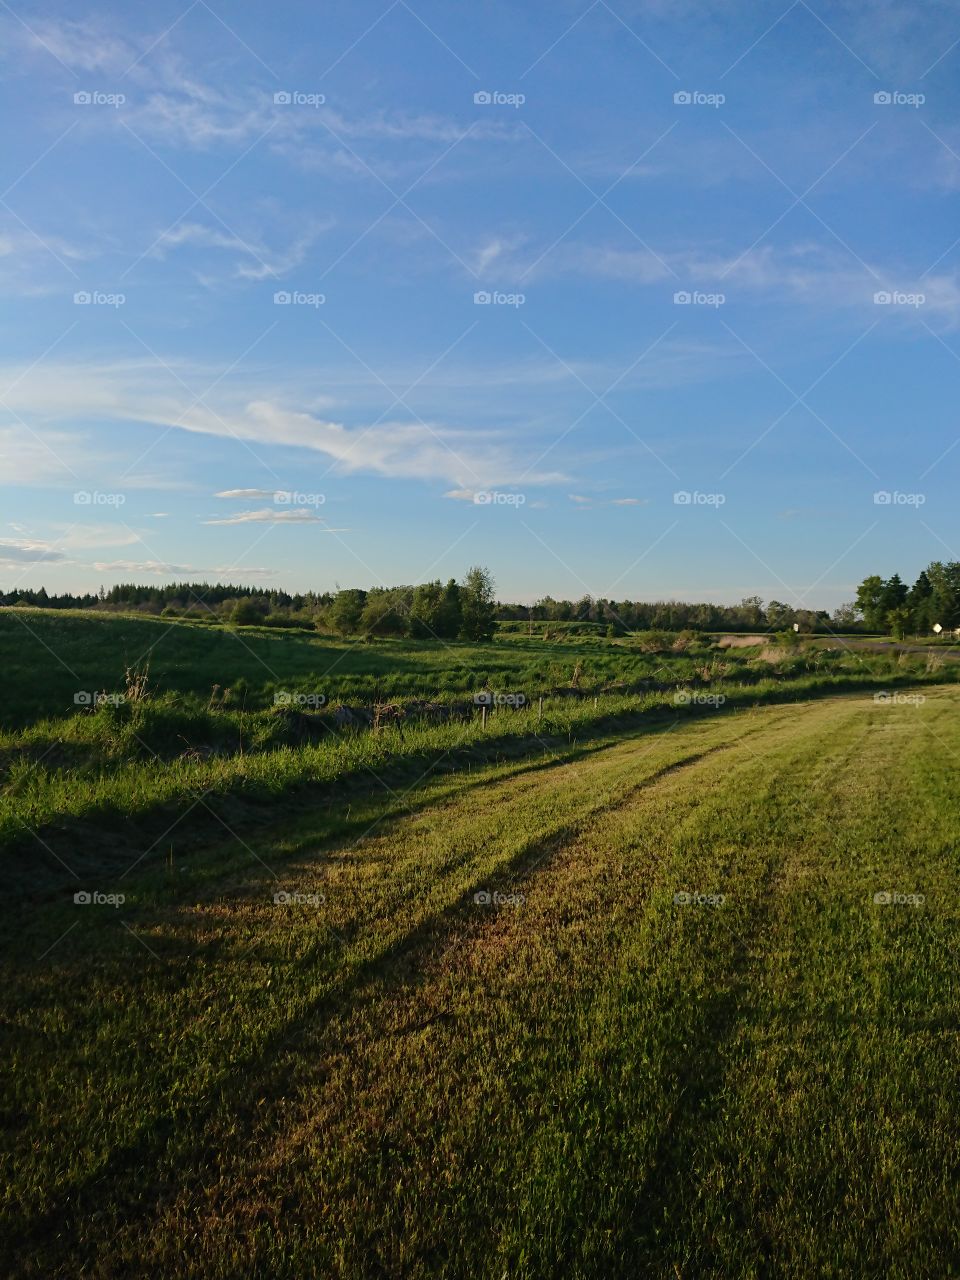 Blue skies and green fields in Cold Lake, Alberta.